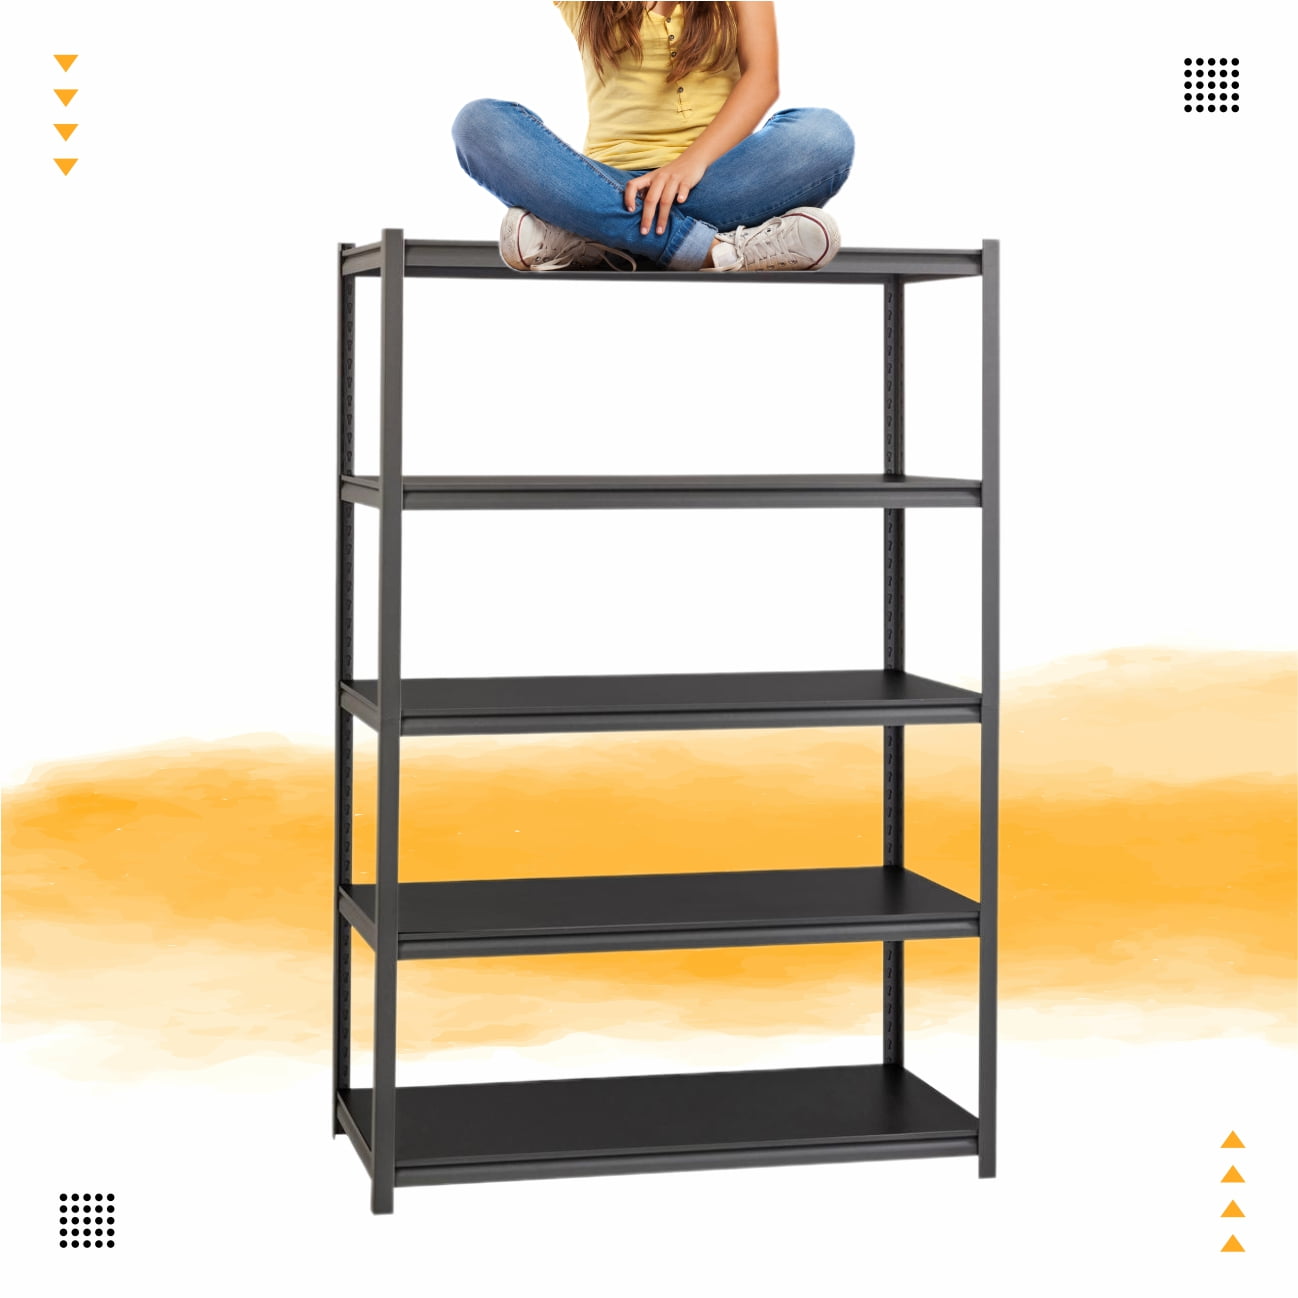 VEVOR Storage Shelf, 5-Tier Storage Shelving Unit, Stainless Steel Garage  Shelf, 47.2 x 17.7 x 70.9 inch Heavy Duty Storage Shelving, 661 Lbs Total  Capacity with Adjustable Height and Vent Holes 